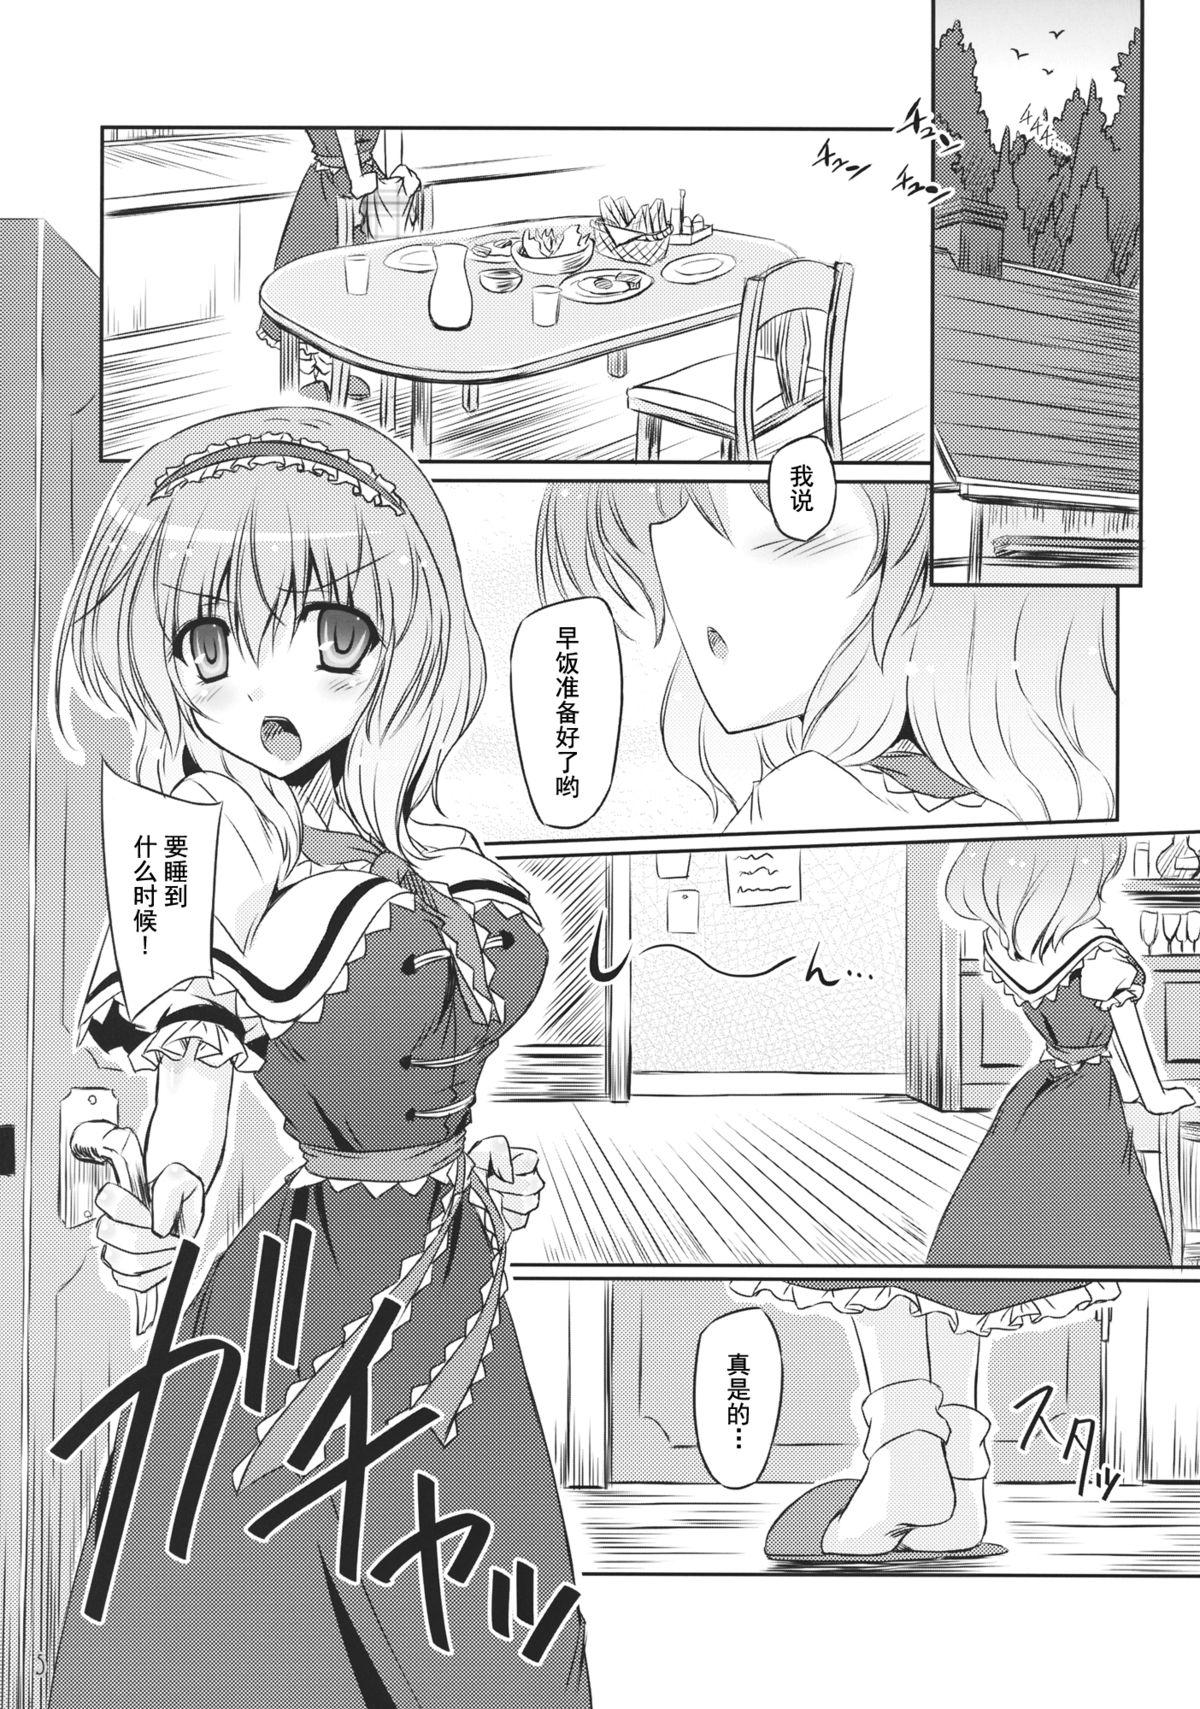 Leite Loose Strings - Touhou project Body Massage - Page 5